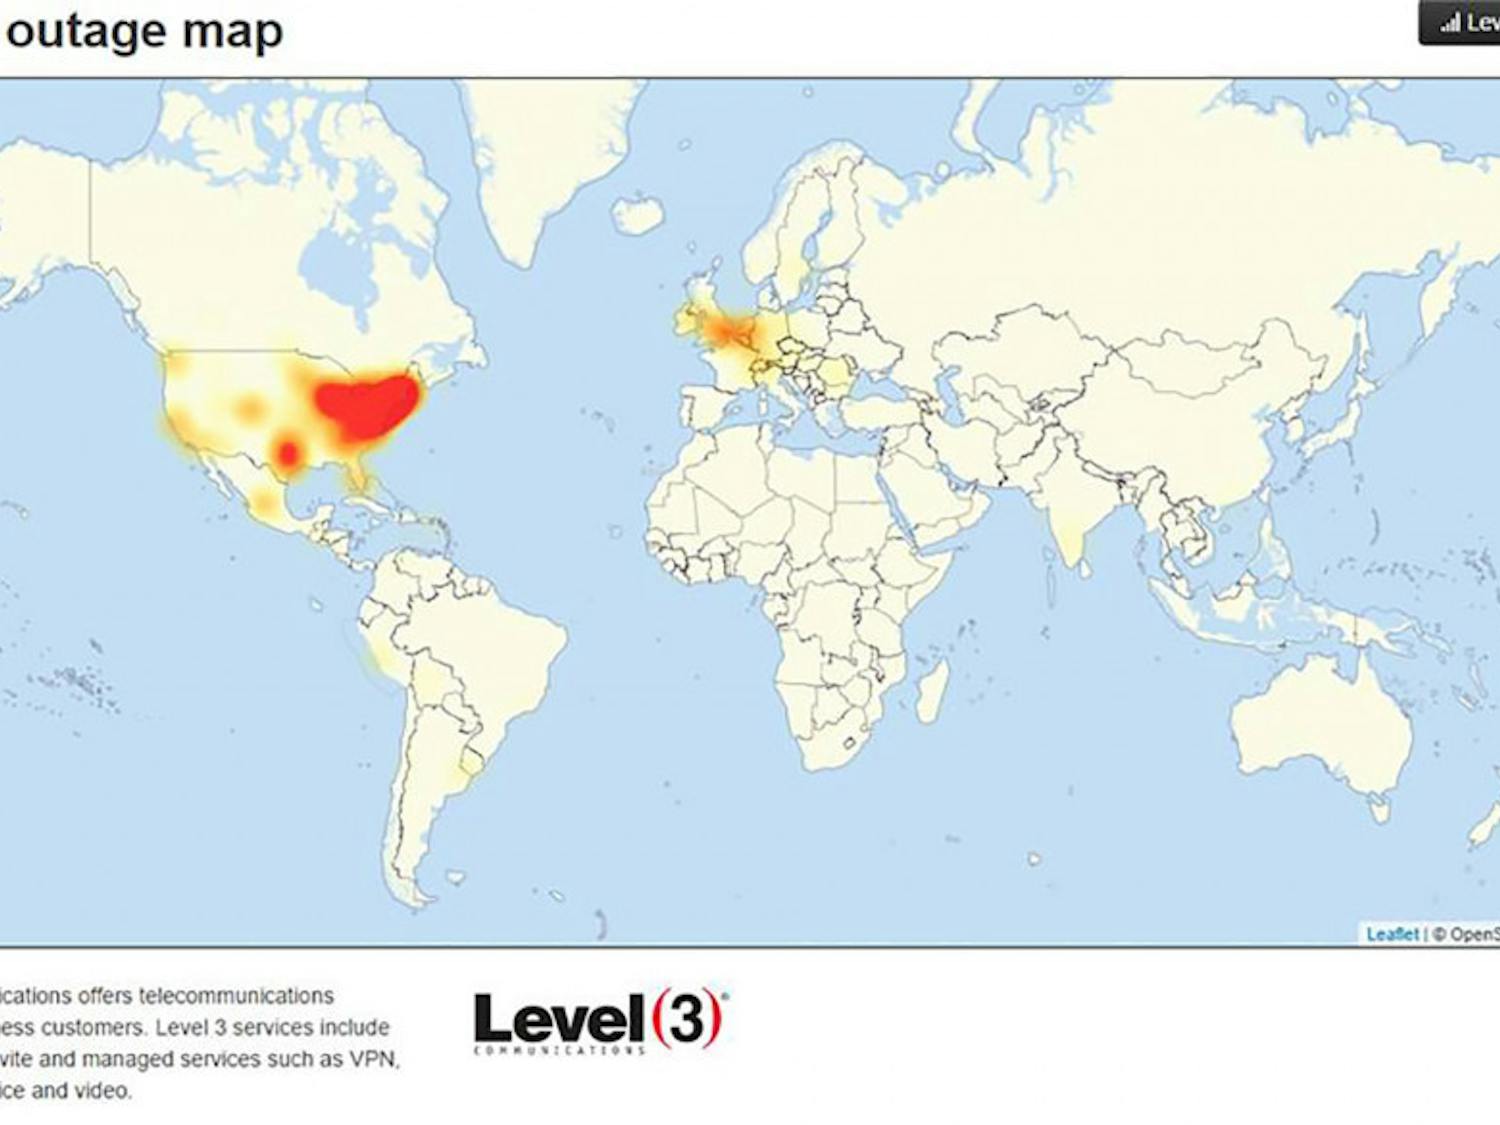 level-3-outage-map-october-2016